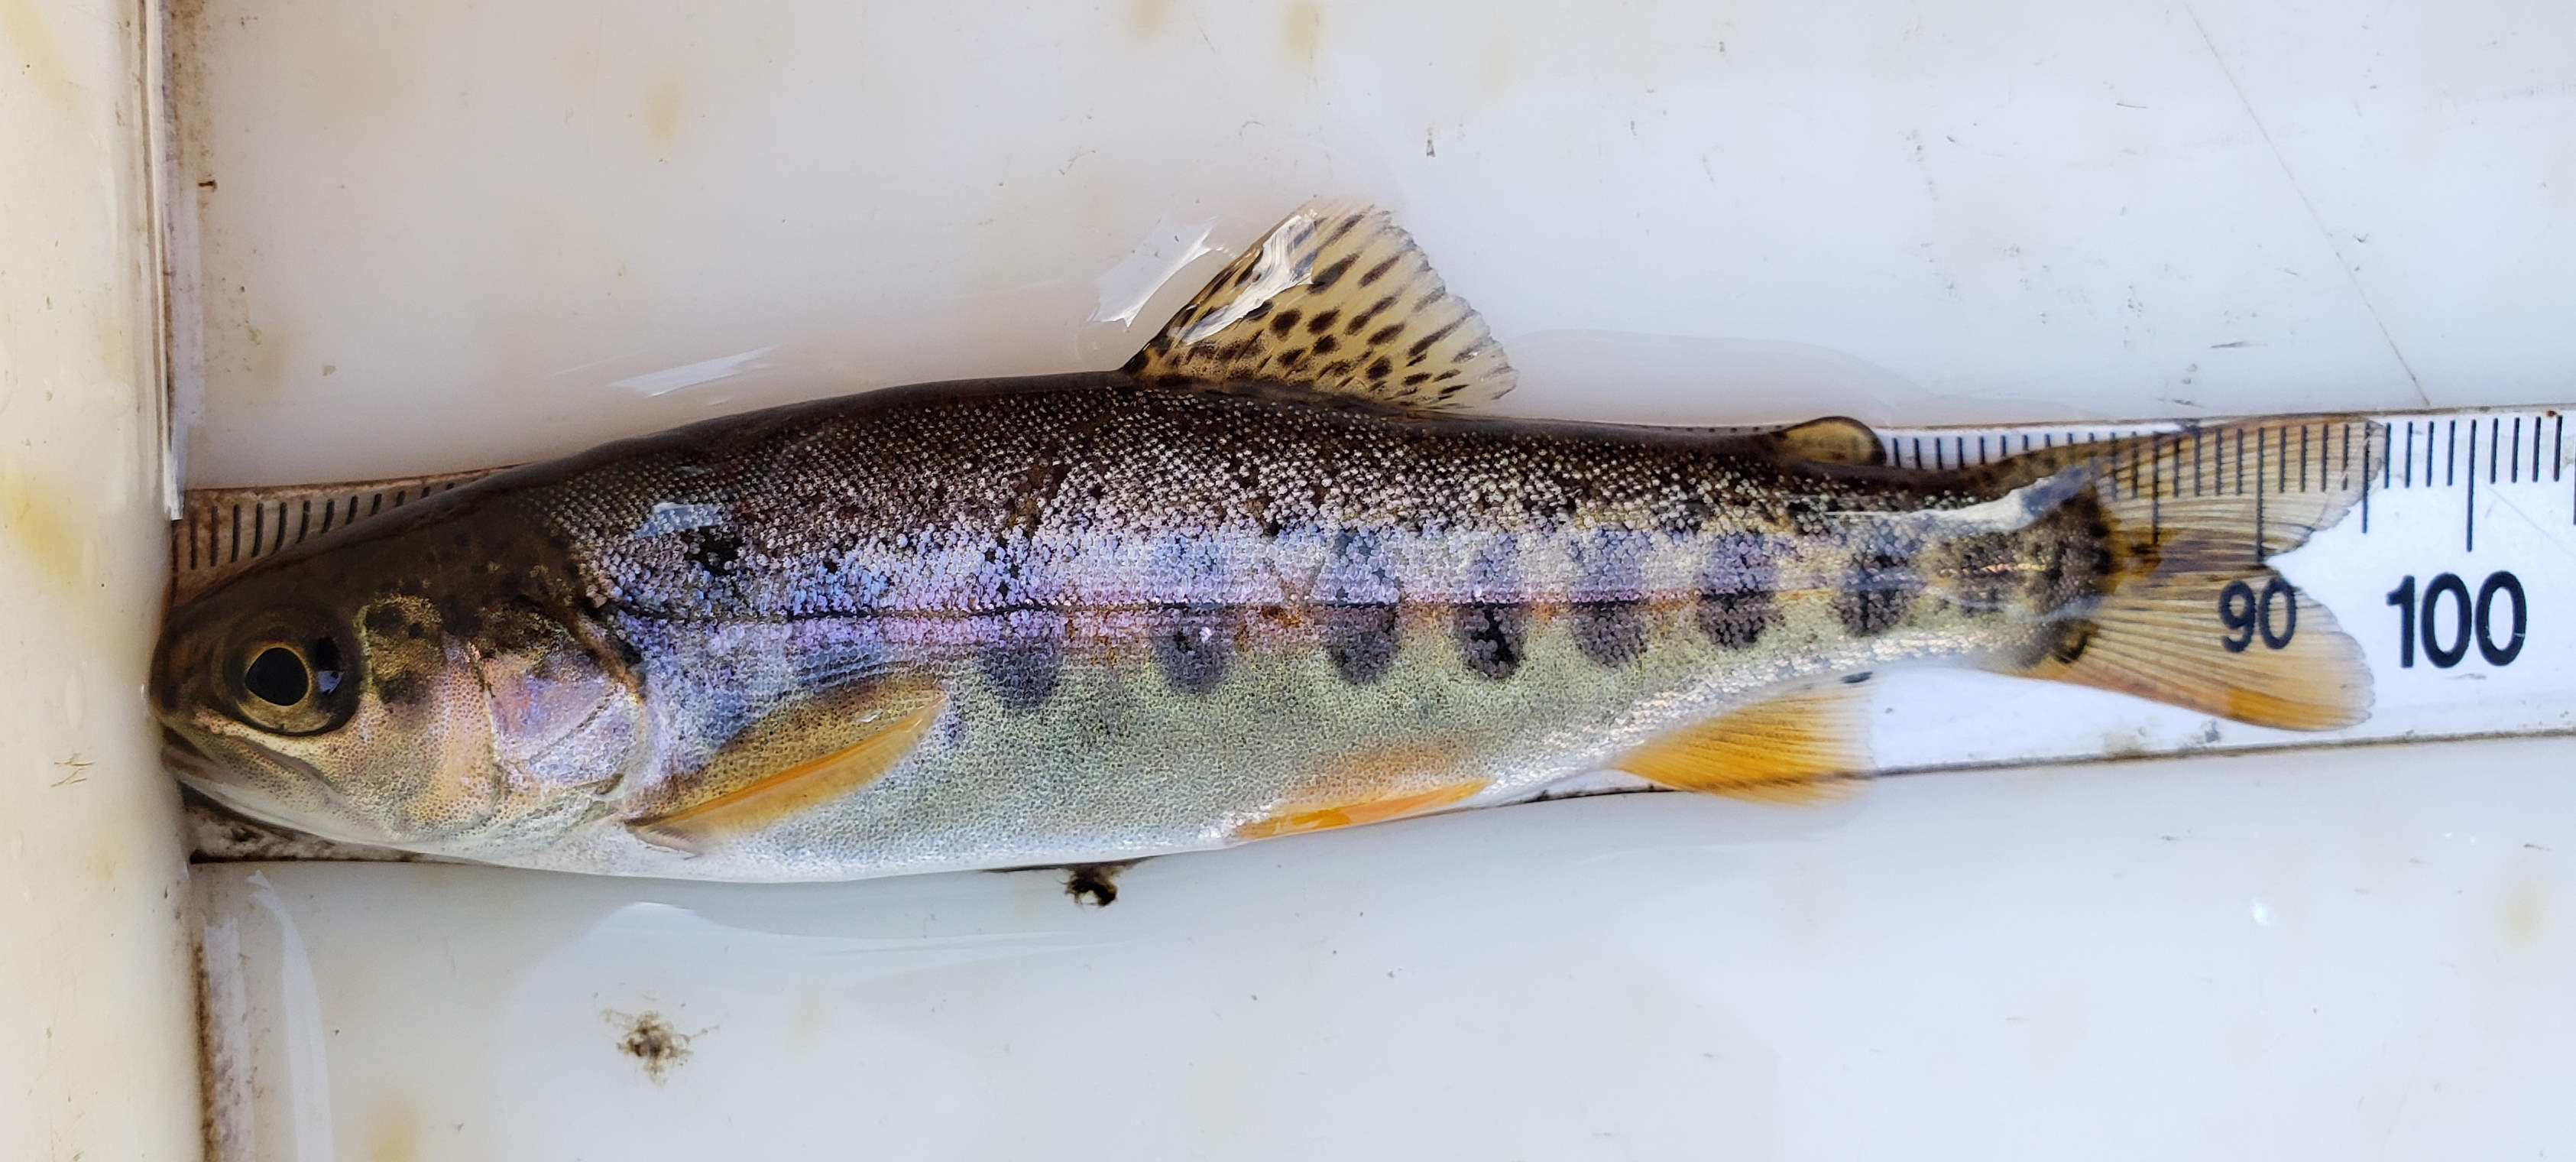 WFR2021.56 This weekend try a lure that imitates a juvenile trout like this rainbow from the Hakataramea River Credit R Adams